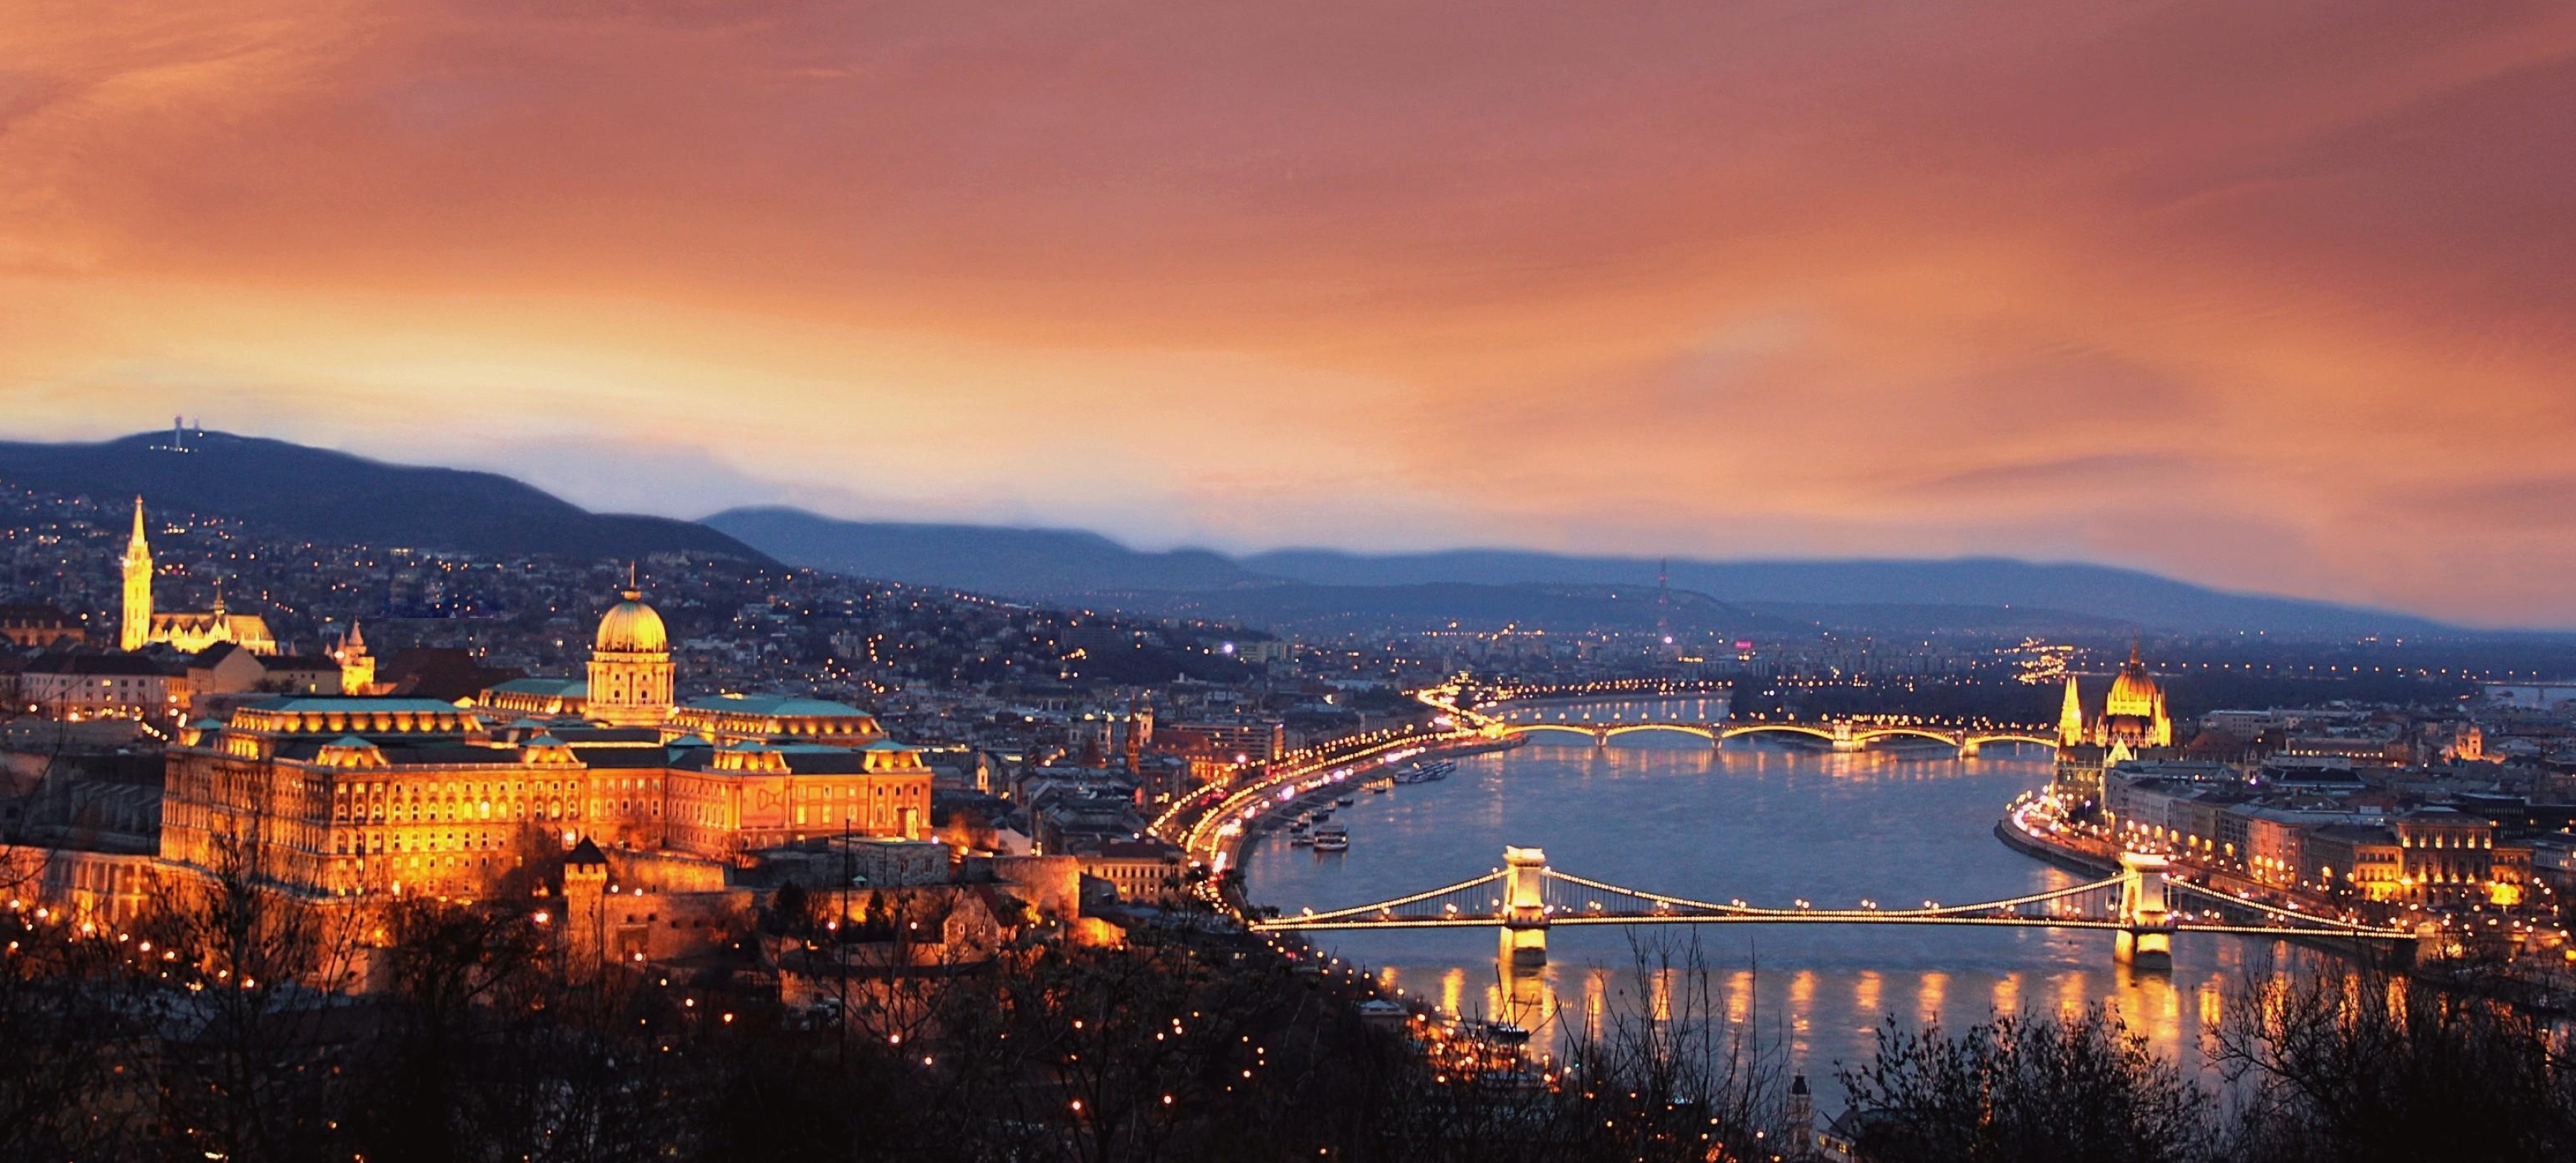 Budapest: One of Europe's most beautiful and romantic cities, City skyline. 3460x1560 Dual Screen Background.